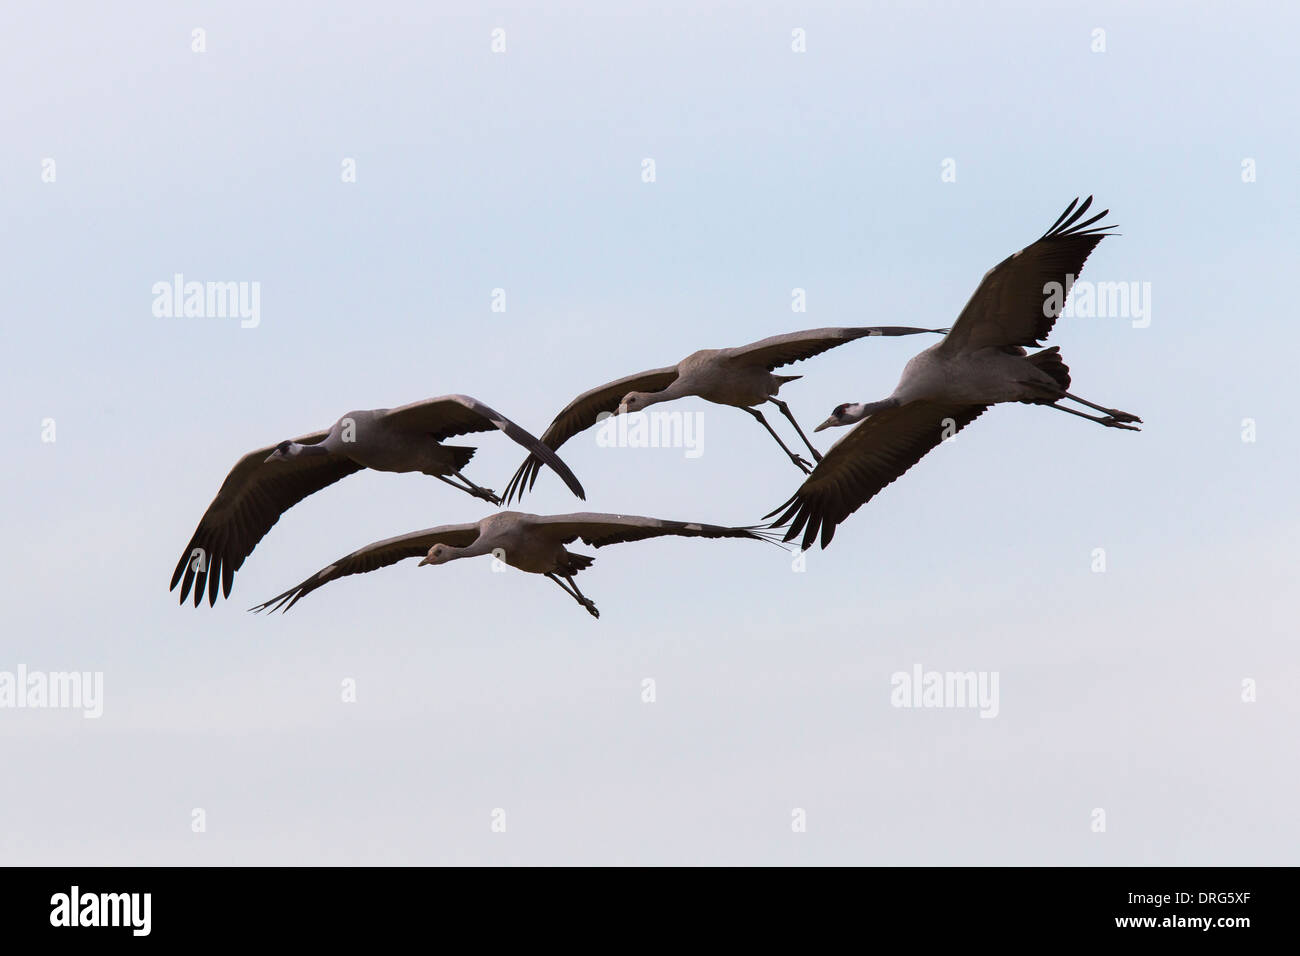 Grauer Kranich, Grus grus, Eurasian Cranes, Common cranes, family with two chicks and parents, Germany, flying in from roost Stock Photo